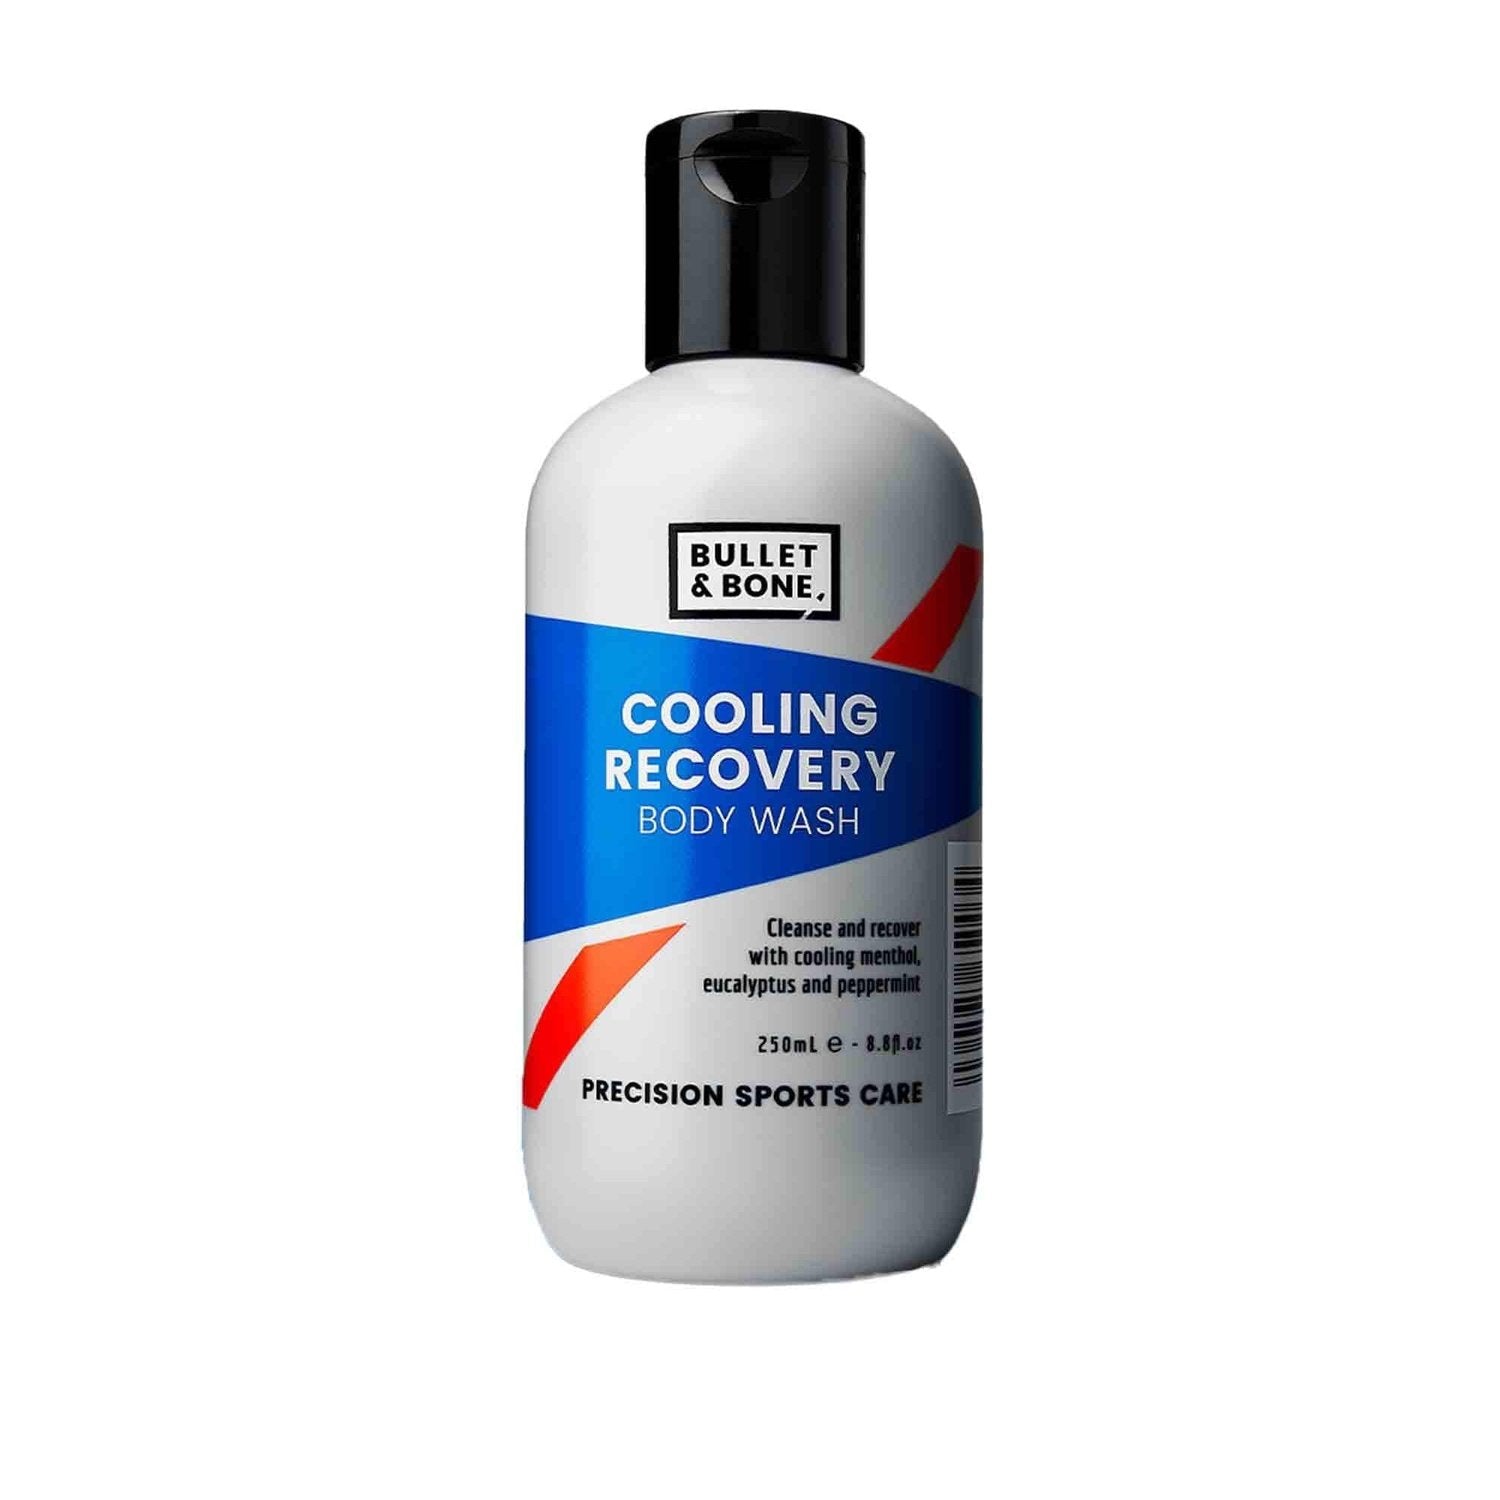 Bullet & Bone Cooling Recovery Body Wash kaufen bei HighPowered.ch